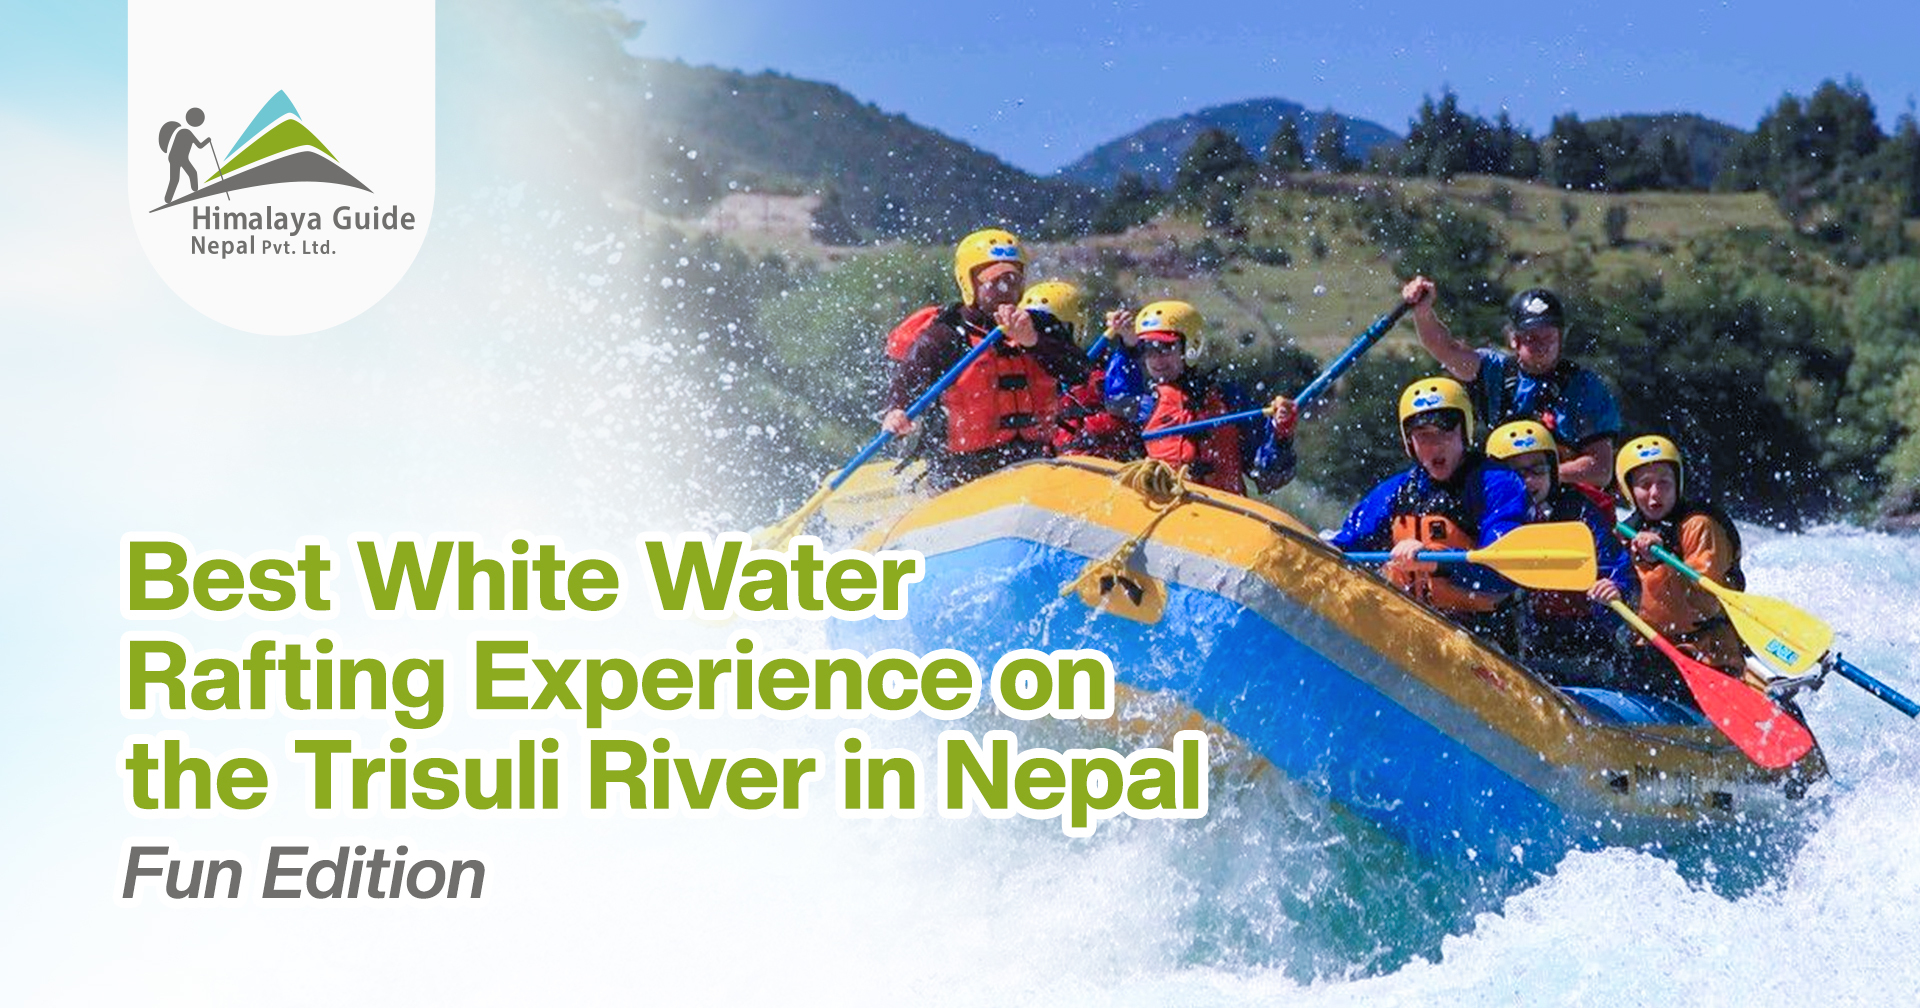 Best White Water Rafting Experience on the Trishuli River in Nepal: Fun Edition